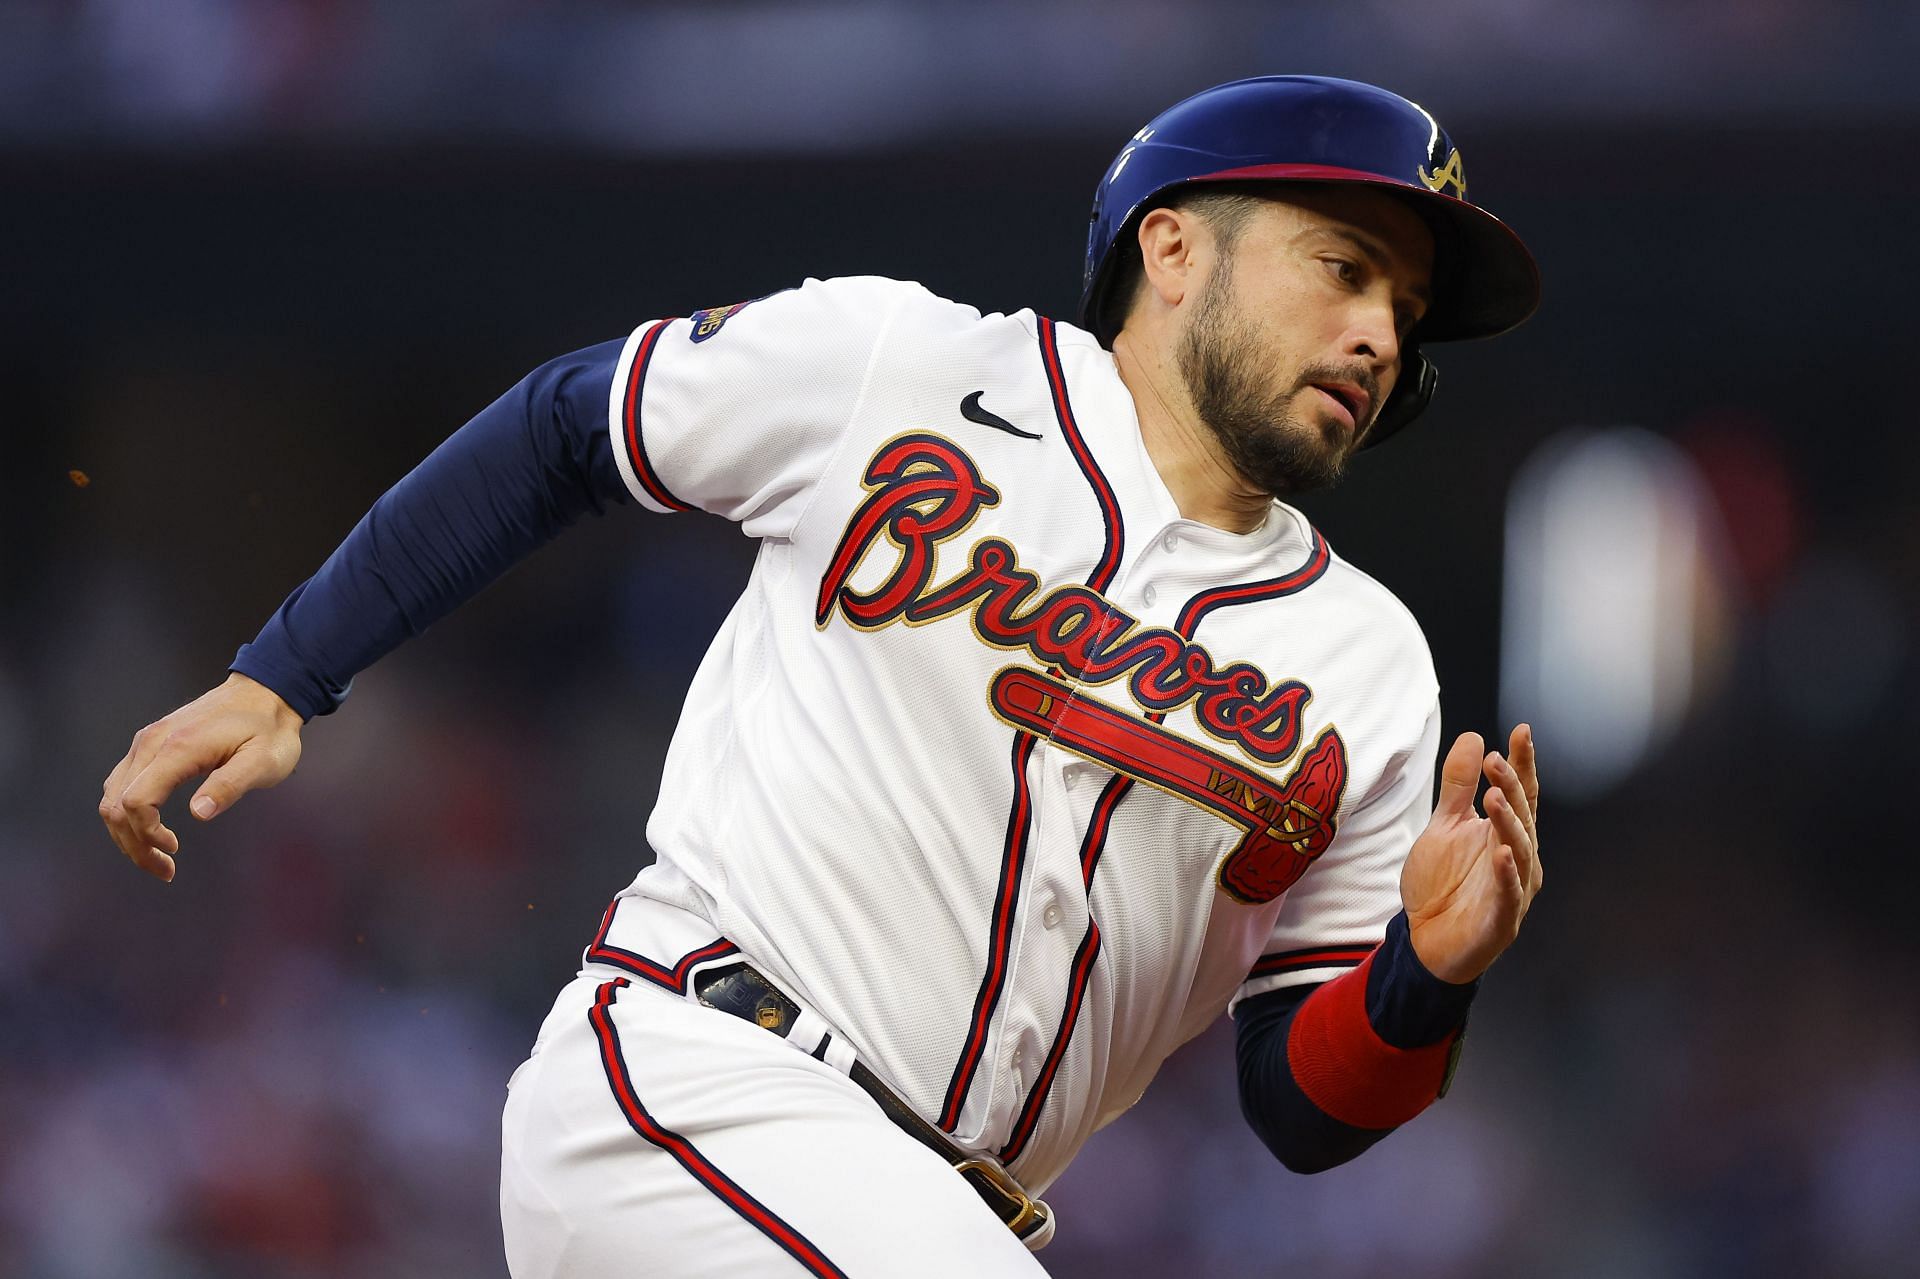 Braves' d'Arnaud jokingly flops to ground after 52-mph hit-by-pitch in  blowout of Nationals - Washington Times